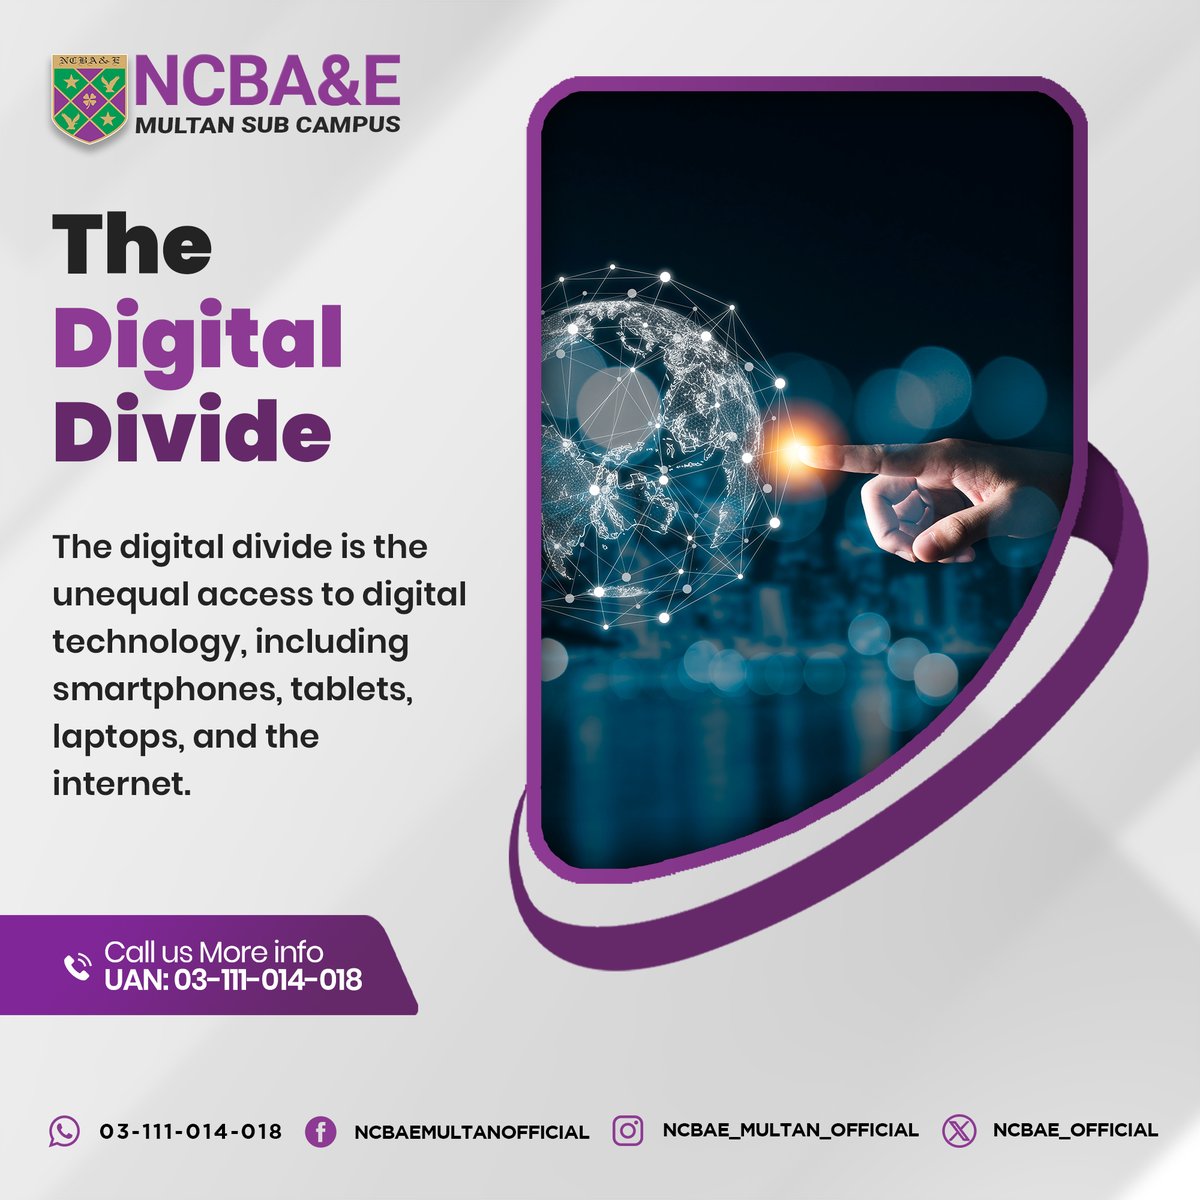 Did You KNow the 𝗱𝗶𝗴𝗶𝘁𝗮𝗹 𝗱𝗶𝘃𝗶𝗱𝗲 is the unequal access to digital technology, creating disparities in information access and opportunities. i's a gap tin digital access based on factors like income, education, and geography.

#DidYouKnow #TeachToLearn #NCBAEUniversity